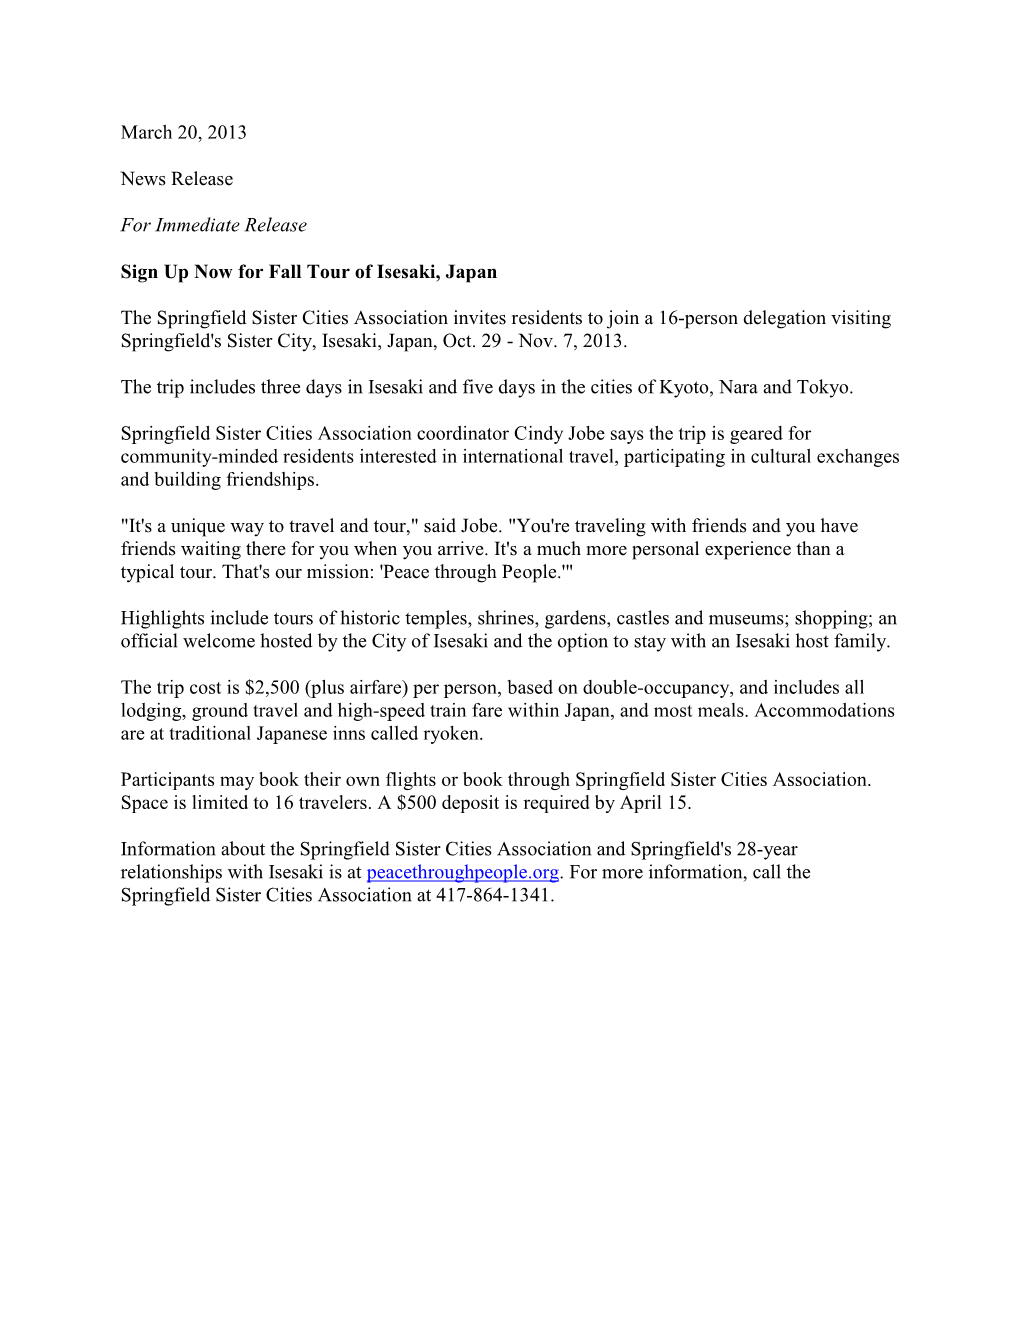 March 20, 2013 News Release for Immediate Release Sign Up